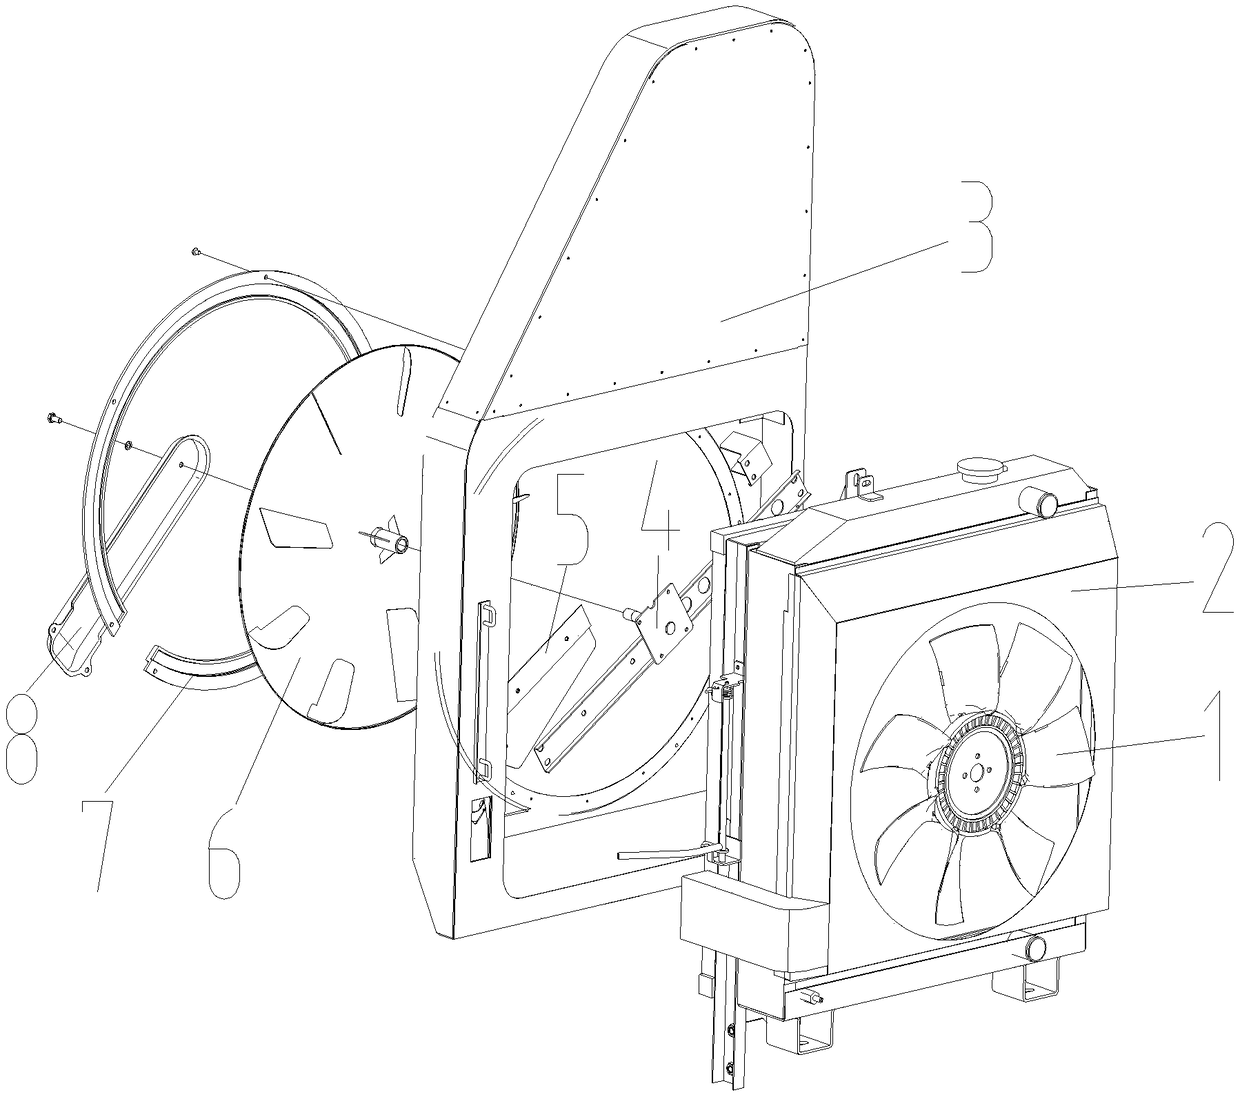 A rotating water tank cover dust removal structure and harvester